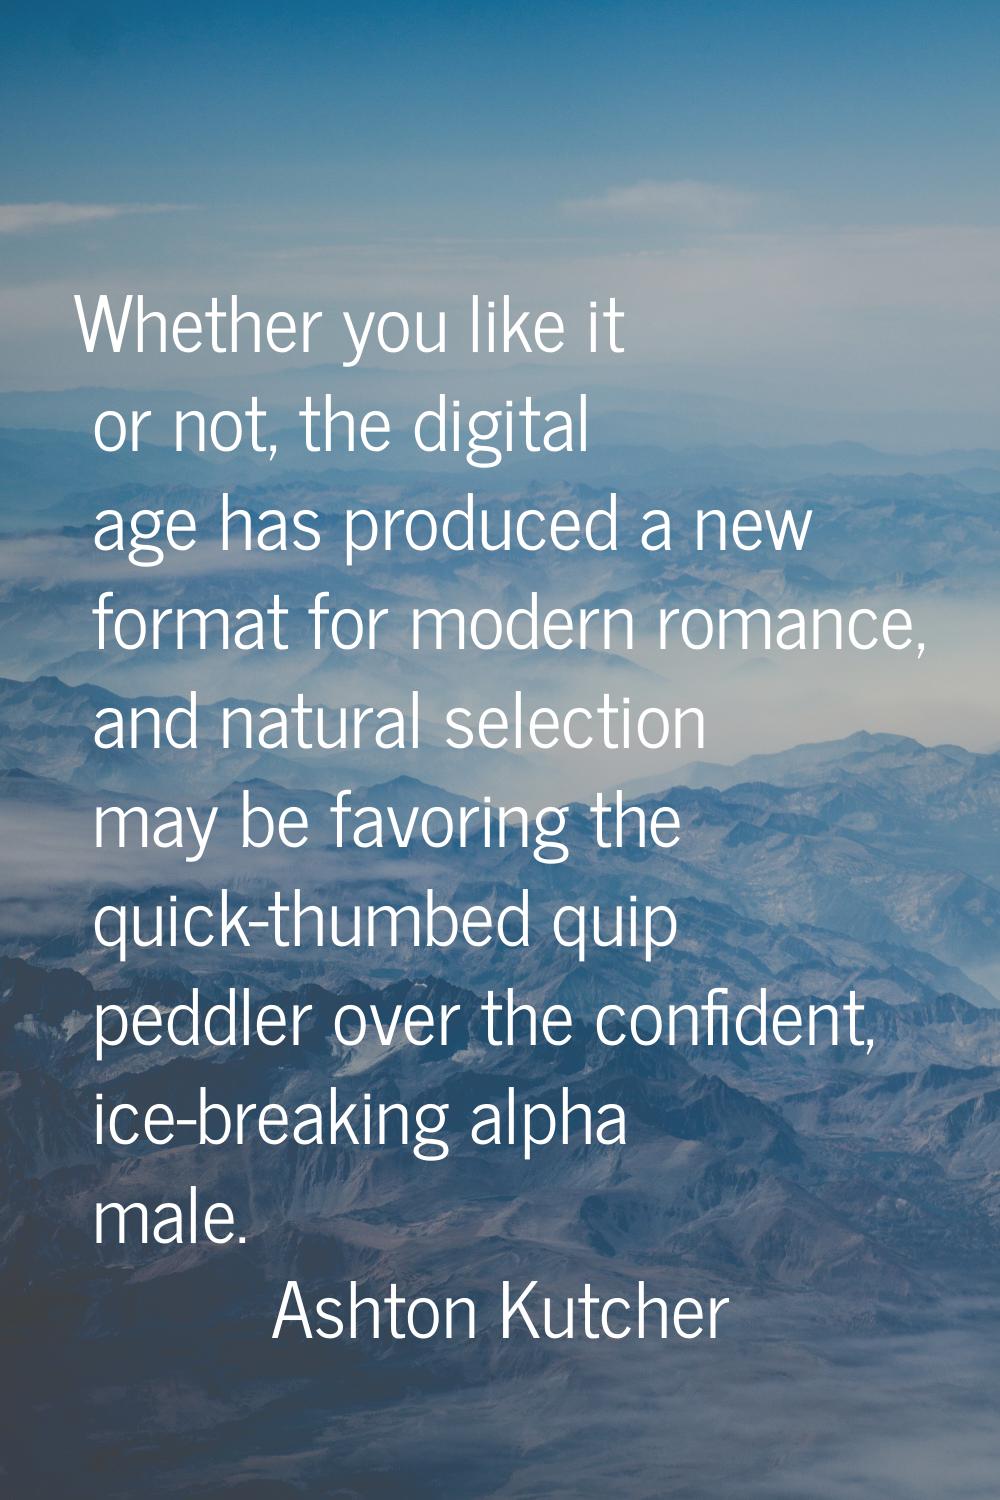 Whether you like it or not, the digital age has produced a new format for modern romance, and natur